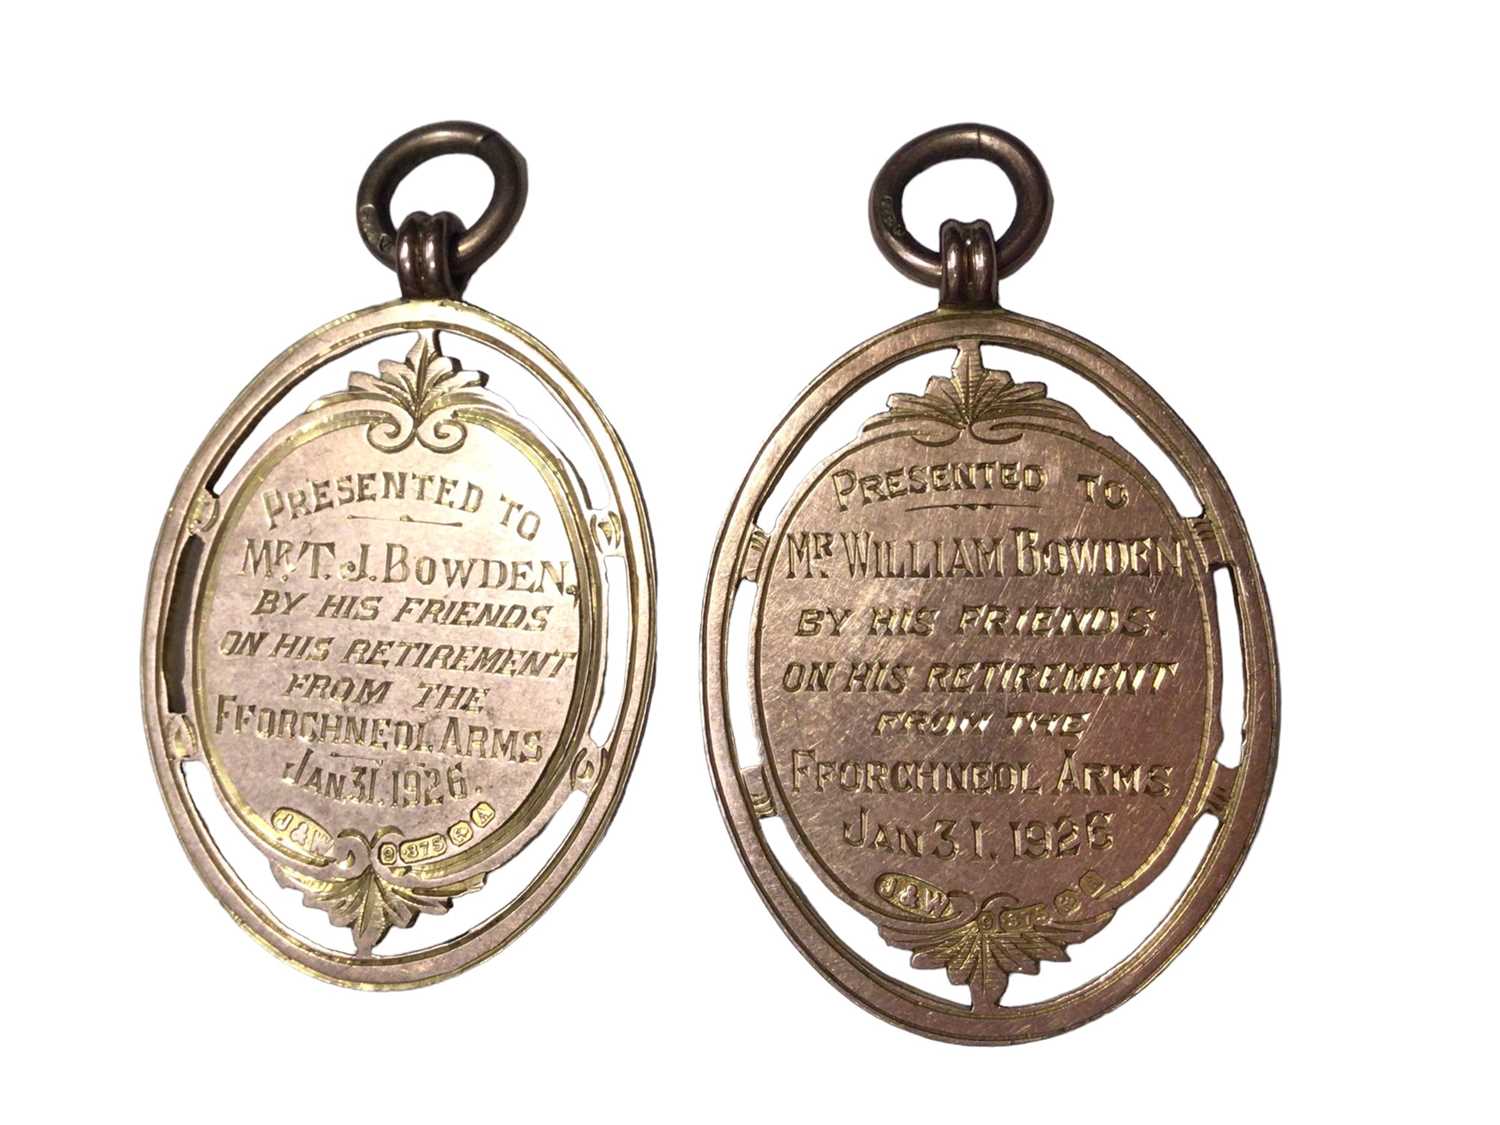 Pair of unusual 9ct gold publicans' pendant fobs engraved with the Fforchneol Arms - Image 2 of 2